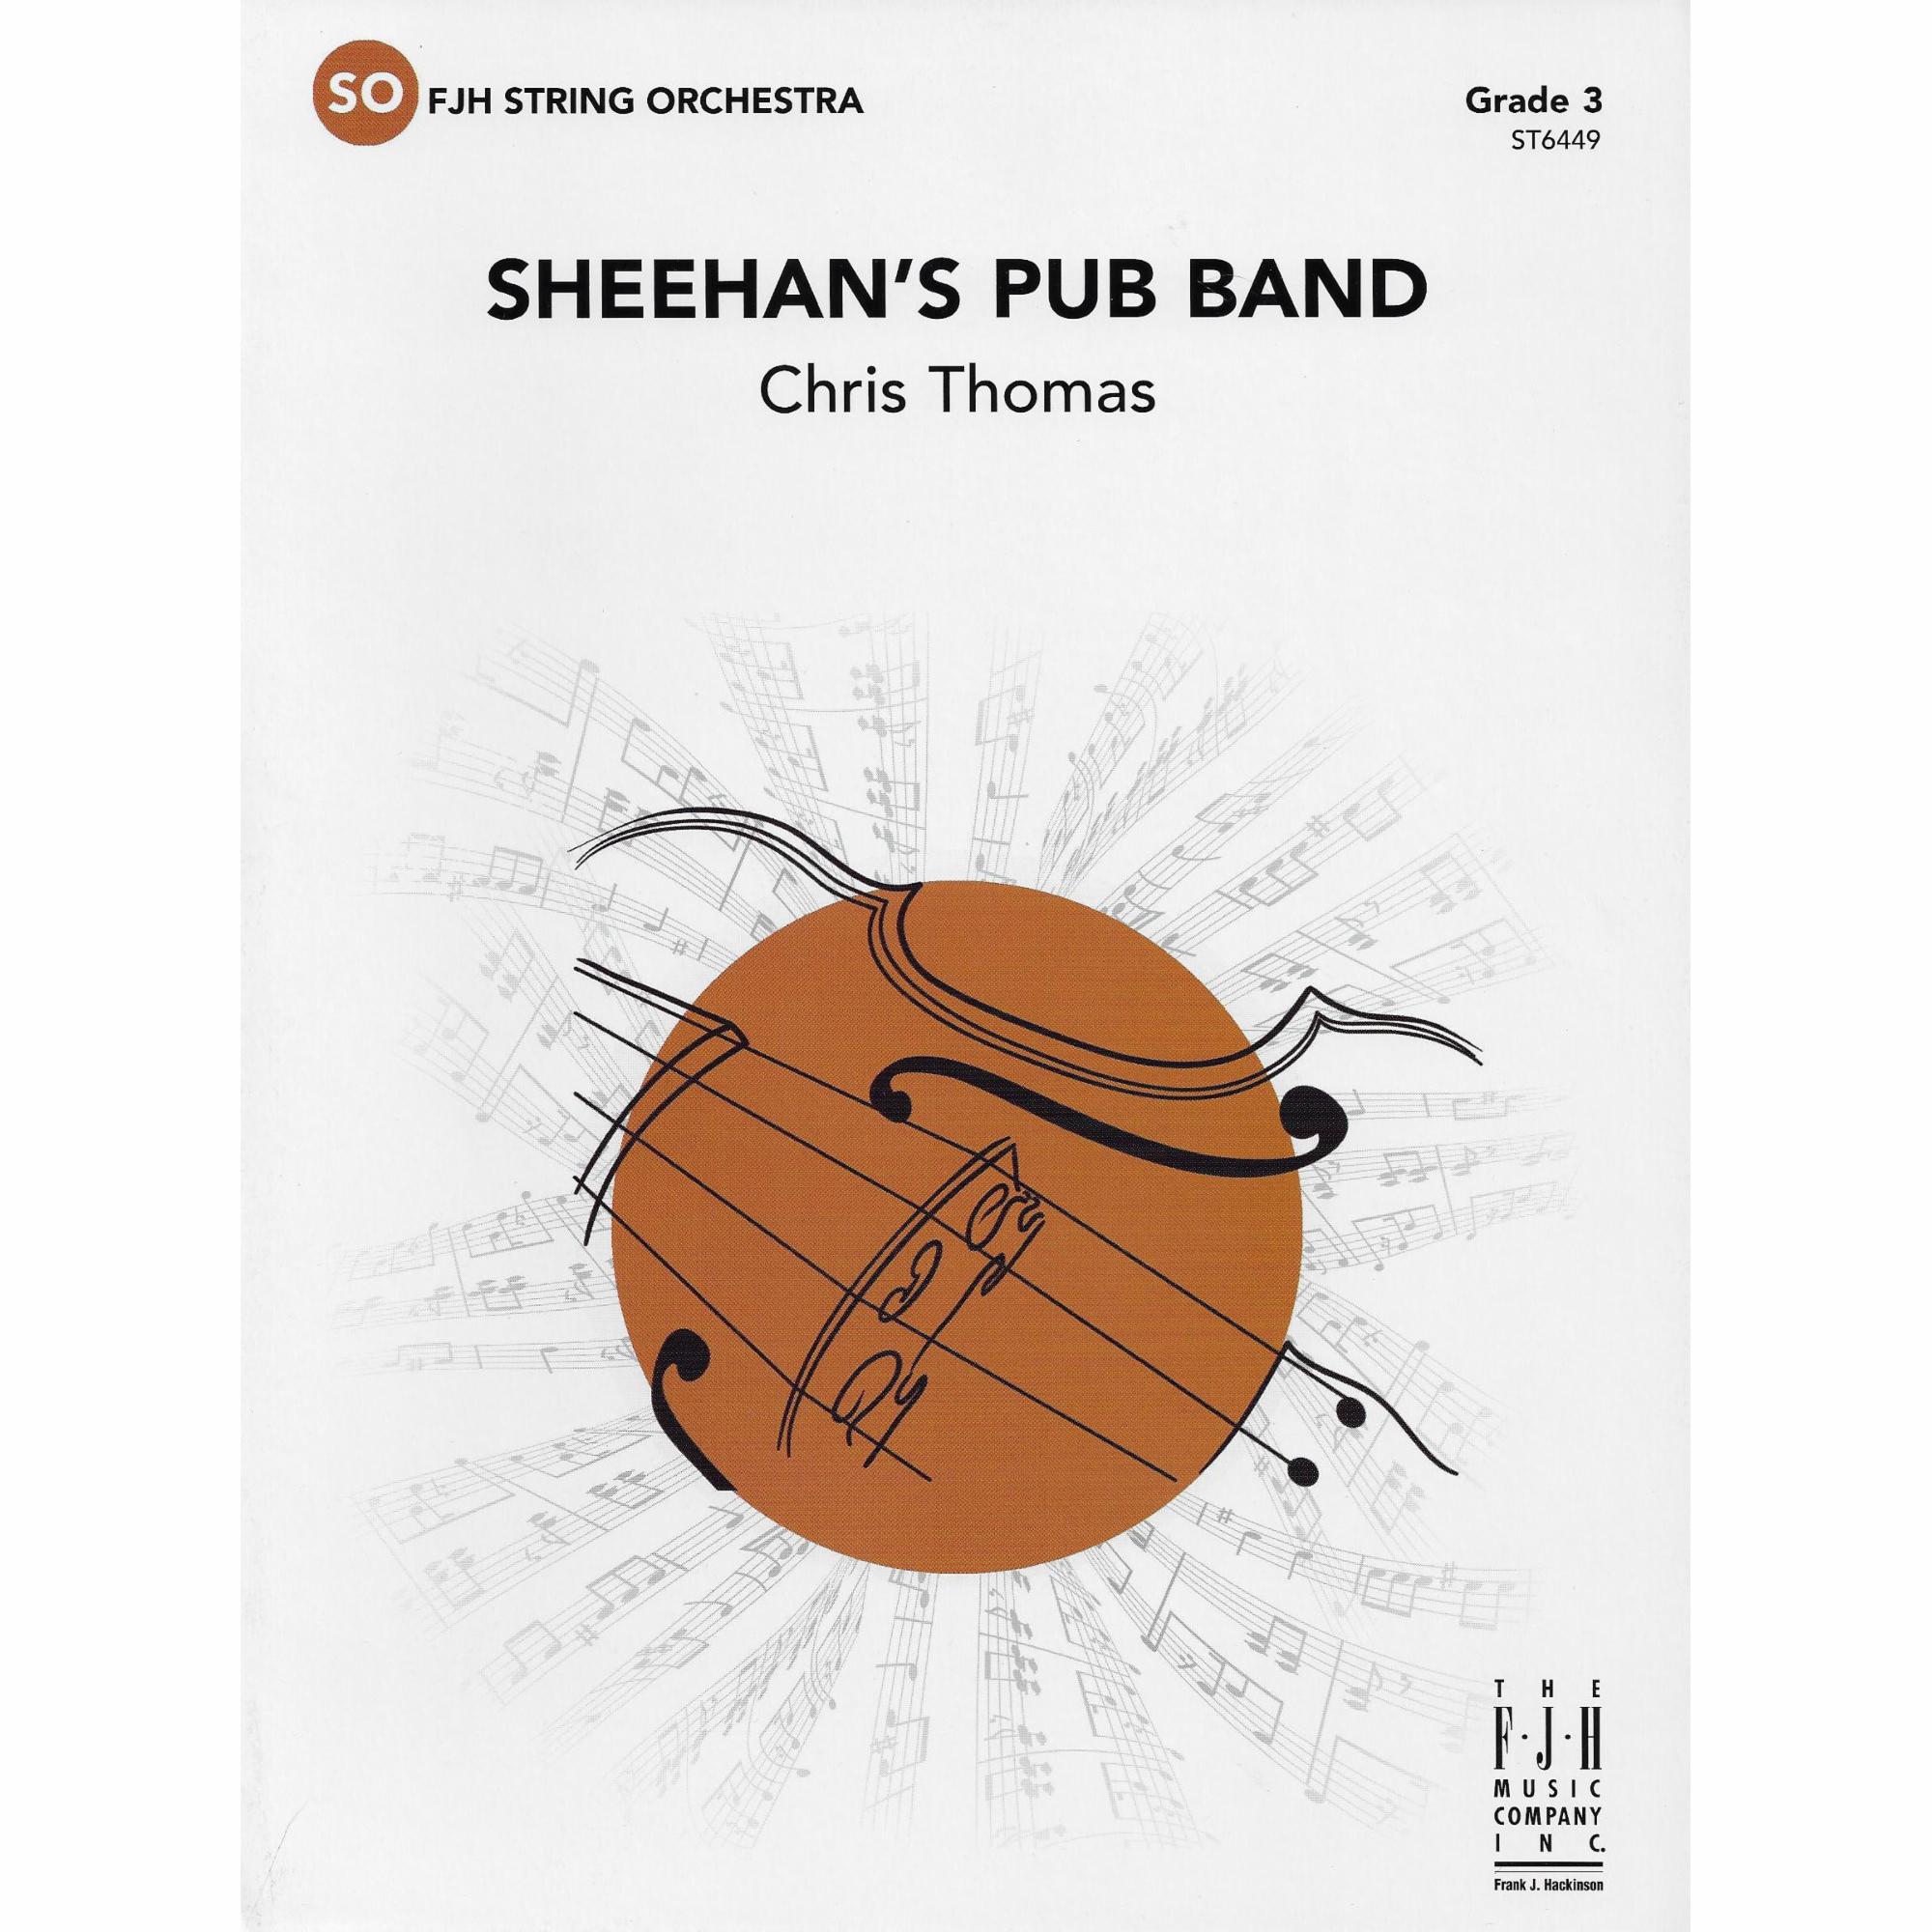 Sheehan's Pub Band for String Orchestra